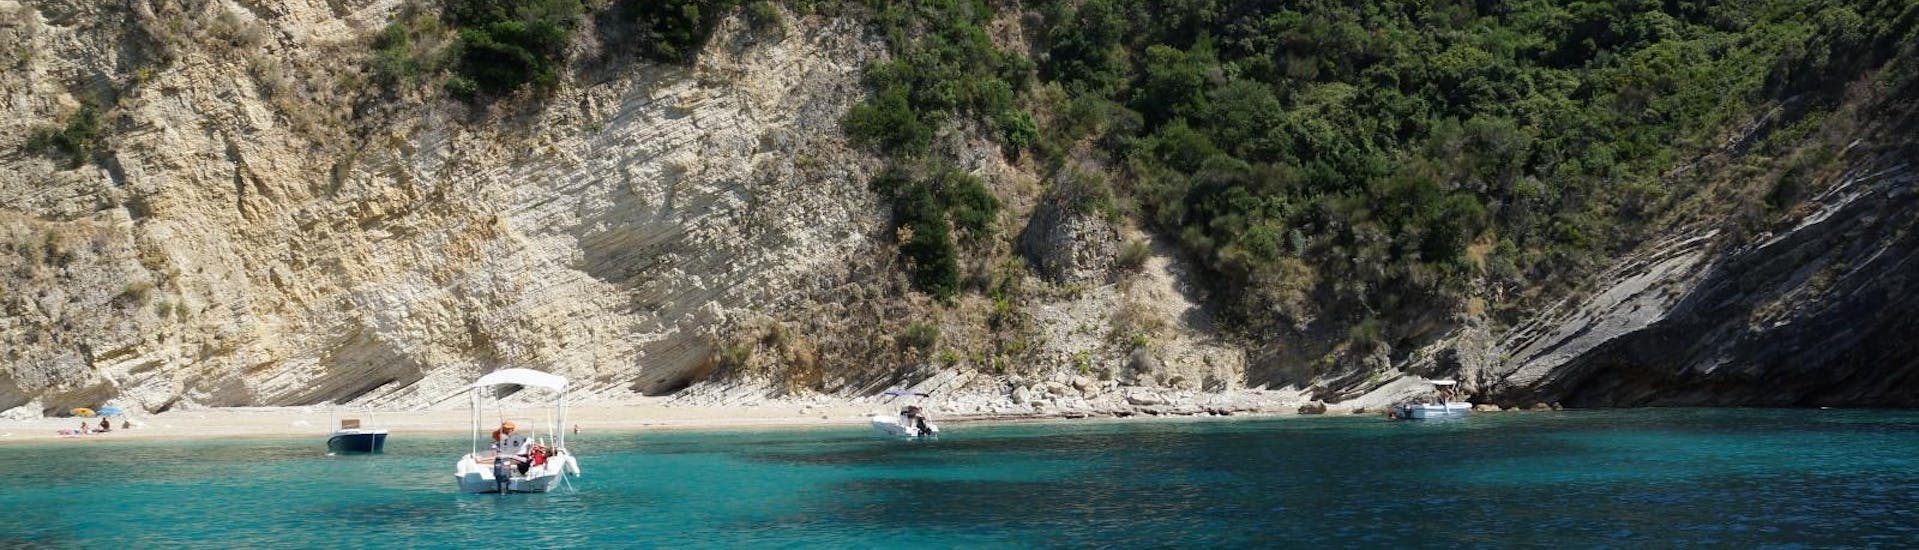 In front of a beautiful coast with a boat from  Ski Club 105 Boat Rental Corfu.